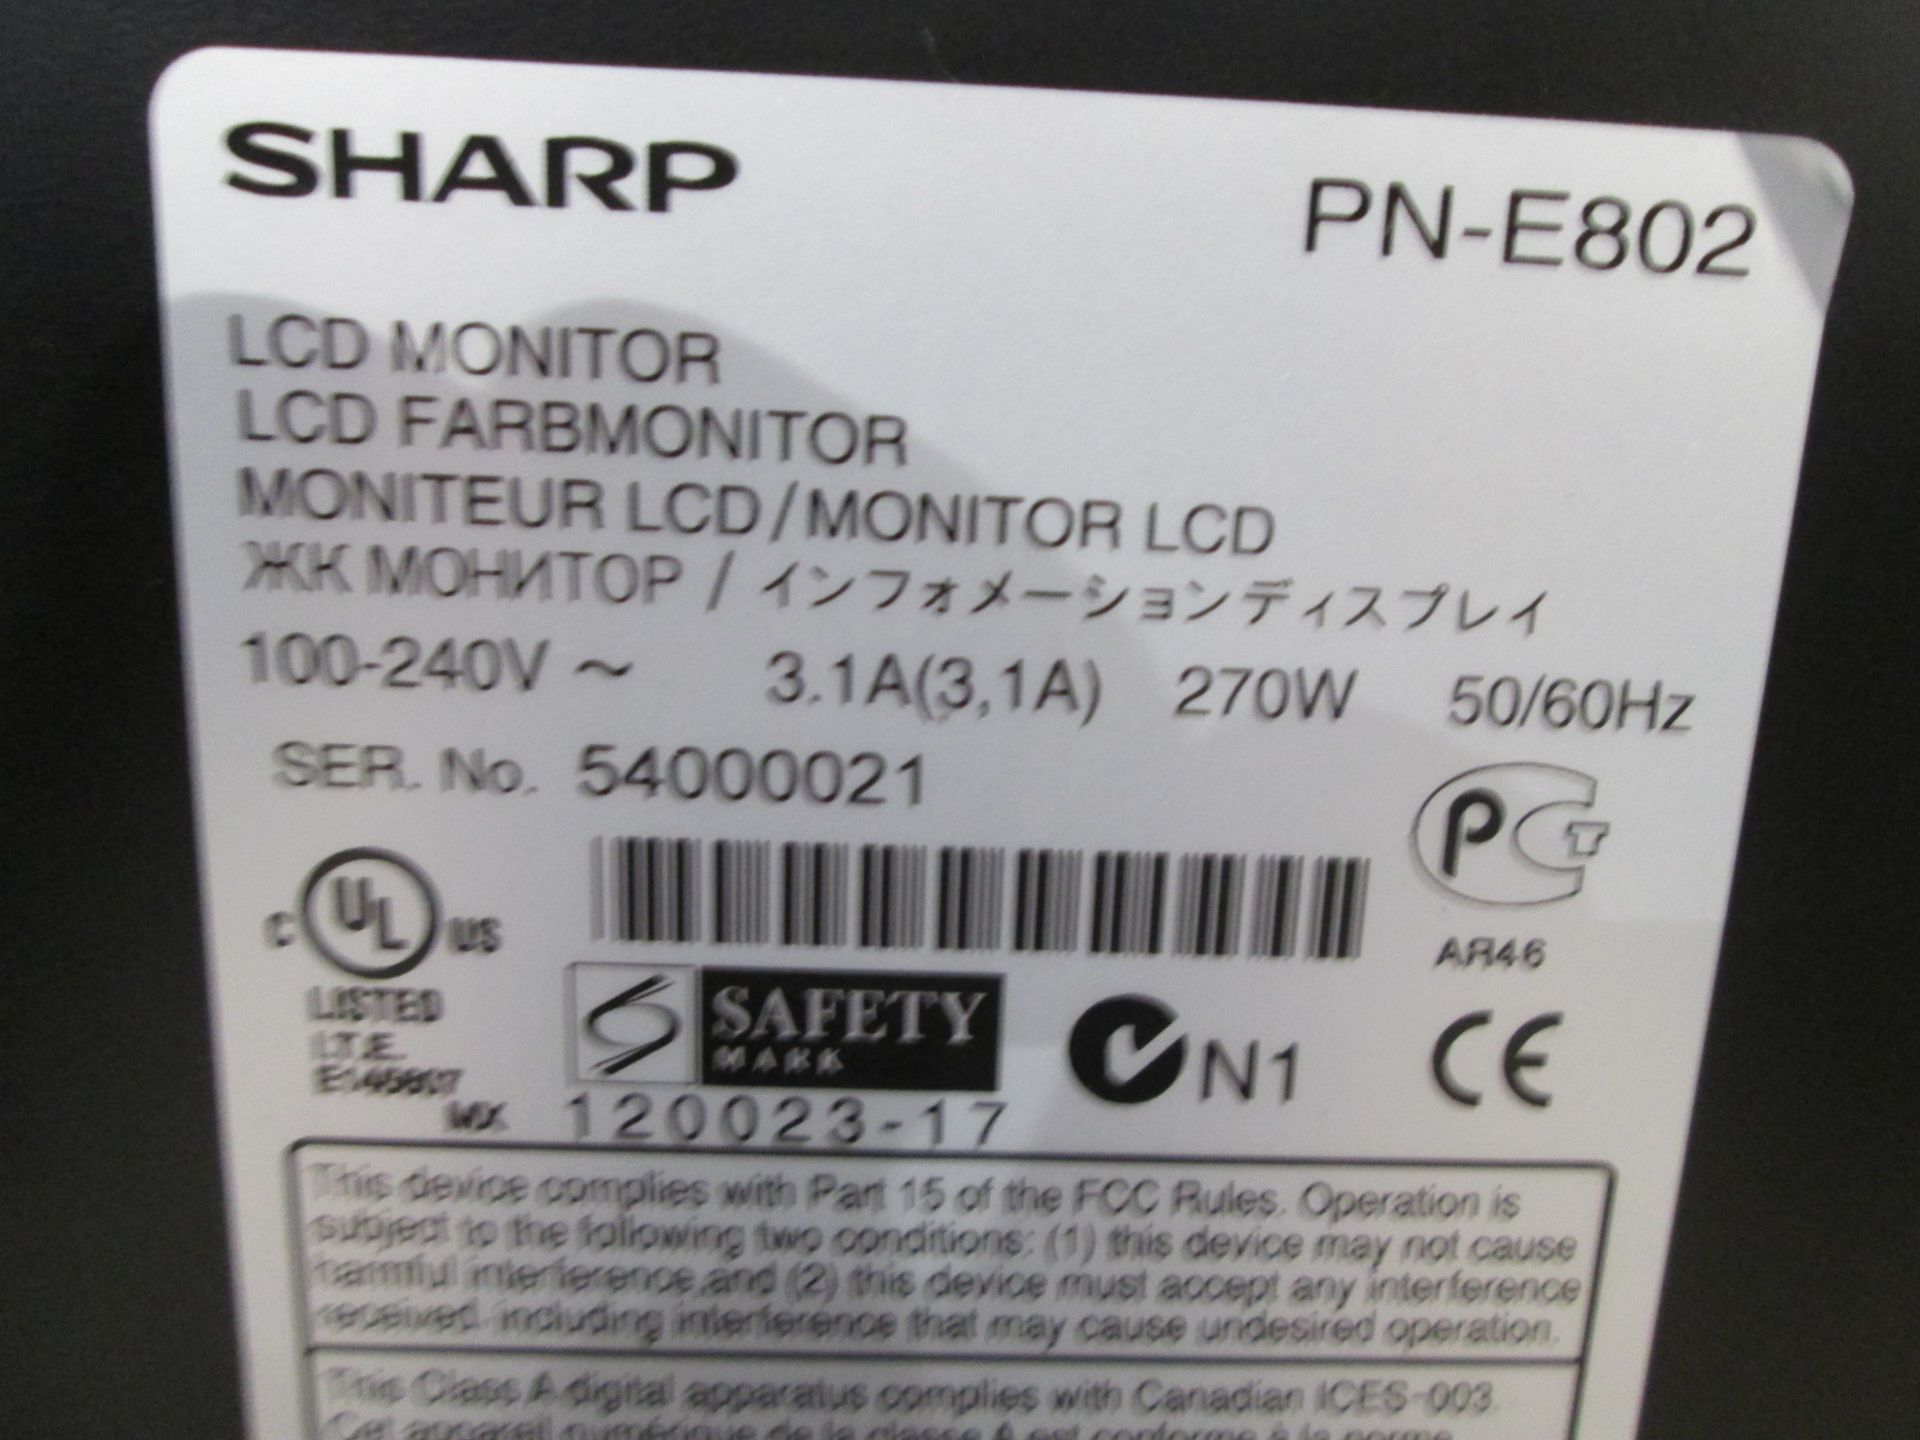 Sharp 80" Colour Monitor, Model PN-E802, S/N 54000021, In flight case with back plate and remote - Image 4 of 5